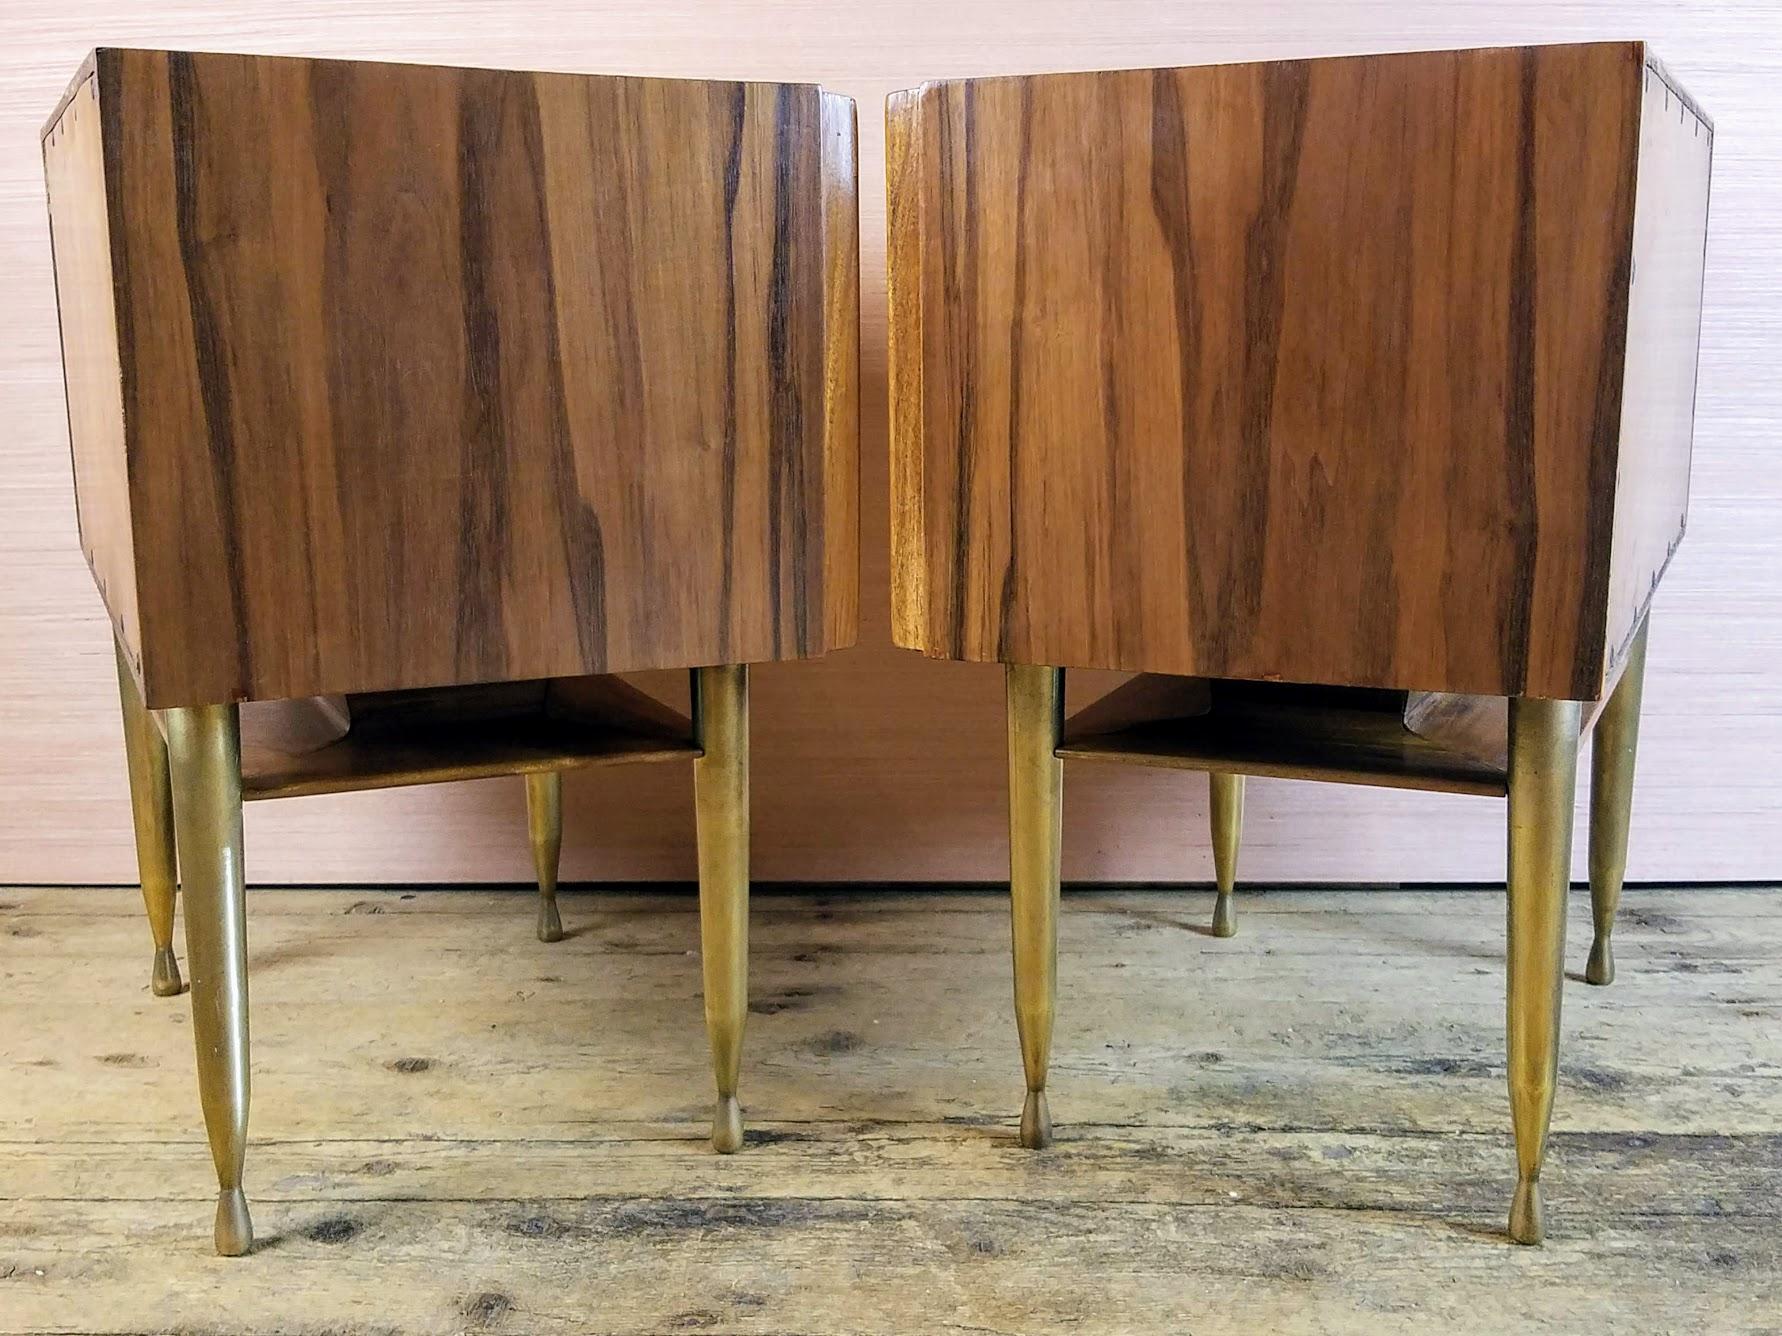 Walnut Vittorio Dassi Pair of End Tables / Nightstands, Italy, Mid-1950s